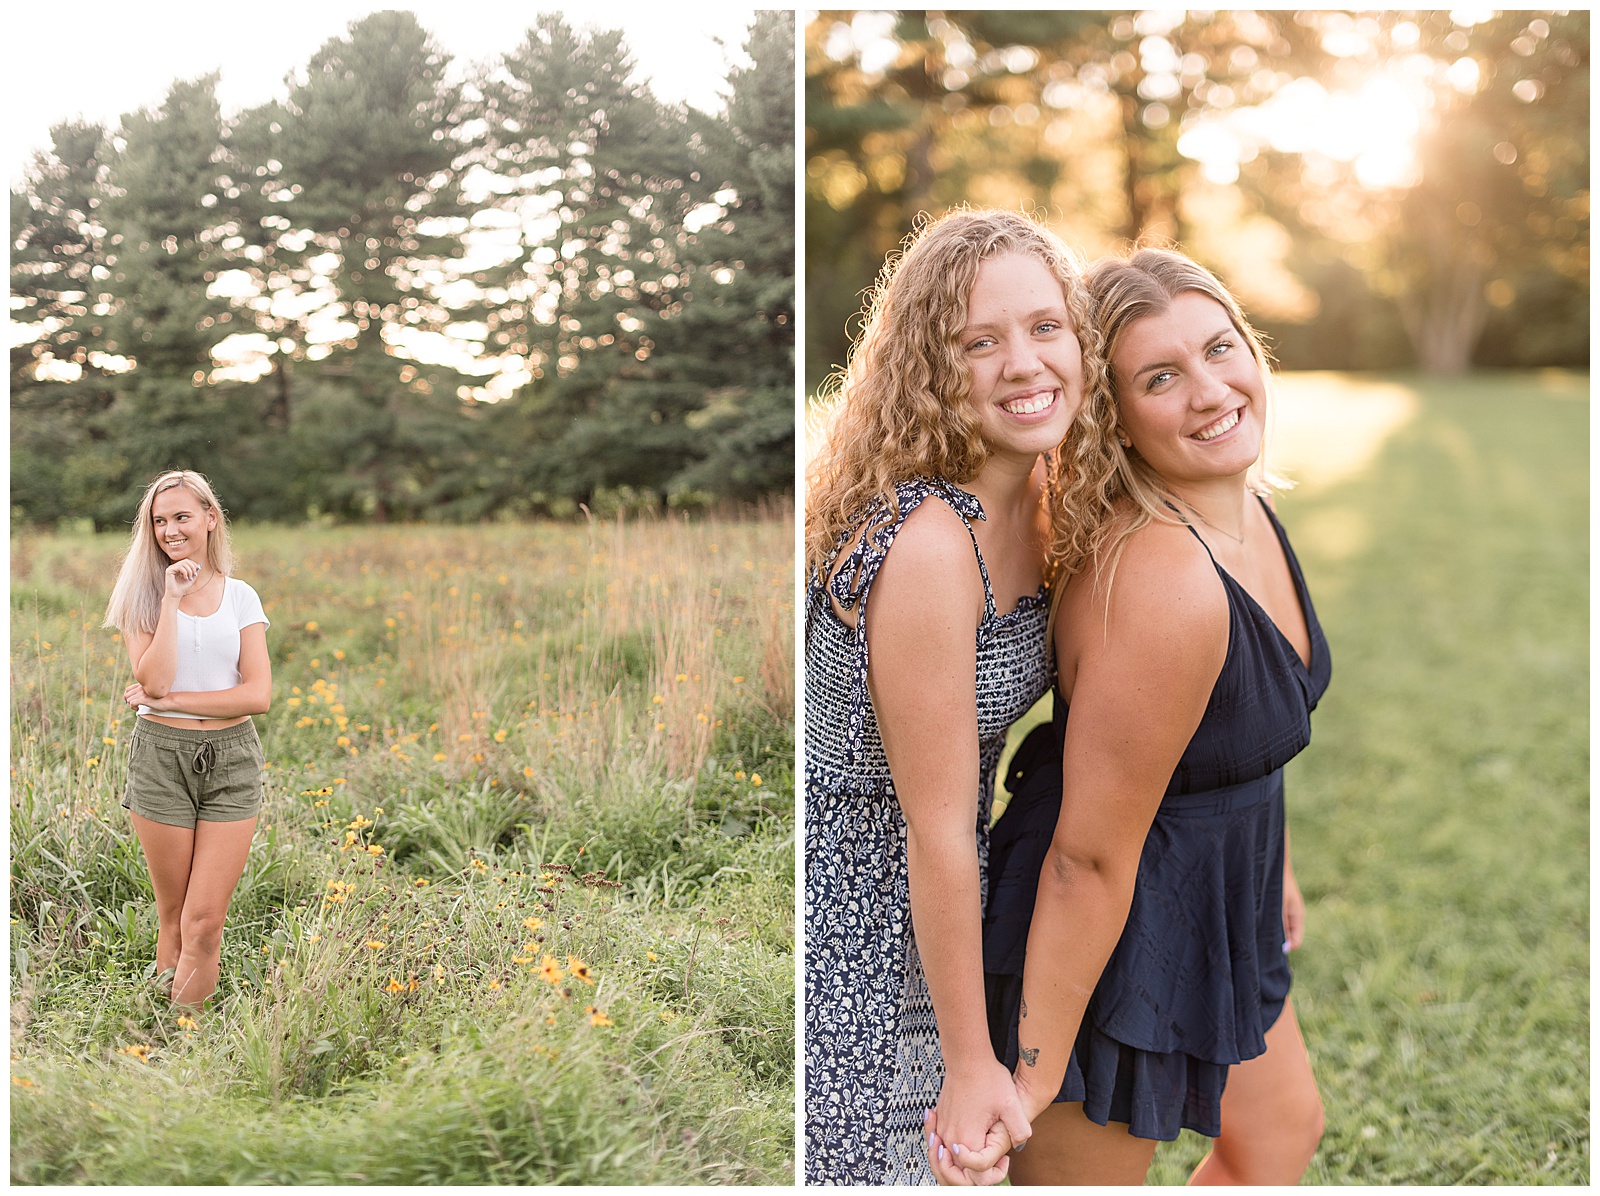 senior girls standing in wildflower grassy field smiling with sun shining through evergreen trees behind them